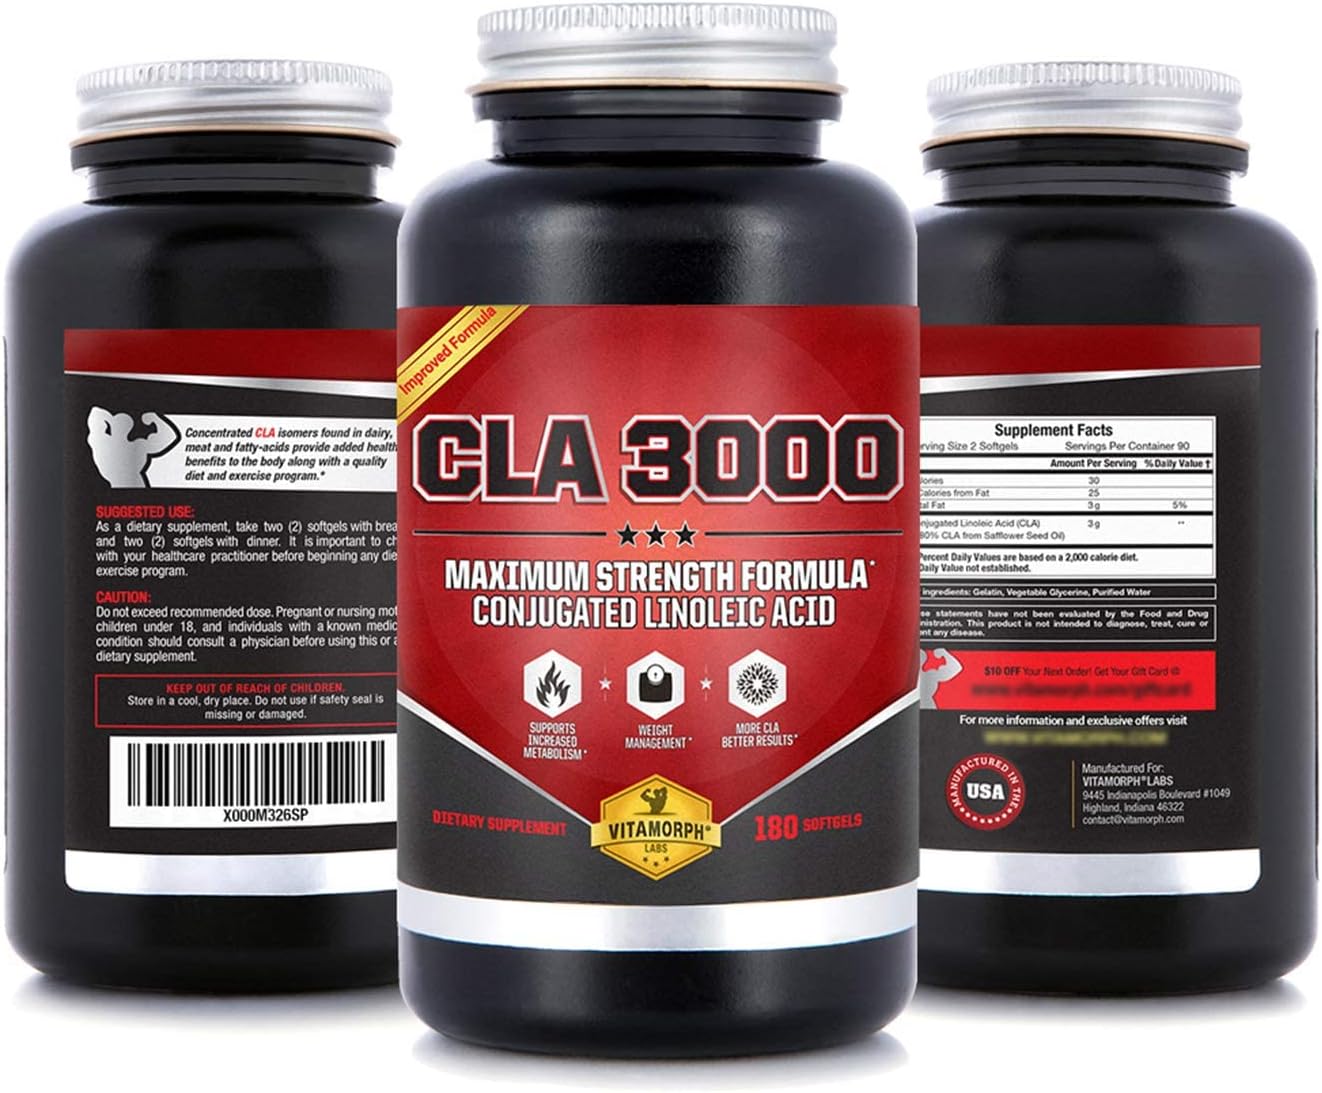 CLA 3000 - CLA Safflower Oil for Metabolism and Weight Loss Management, Maximum Strength Conjugated Linoleic Acid, Stimulant-Free Non-GMO Safflower Cla 180 Softgels : Health & Household